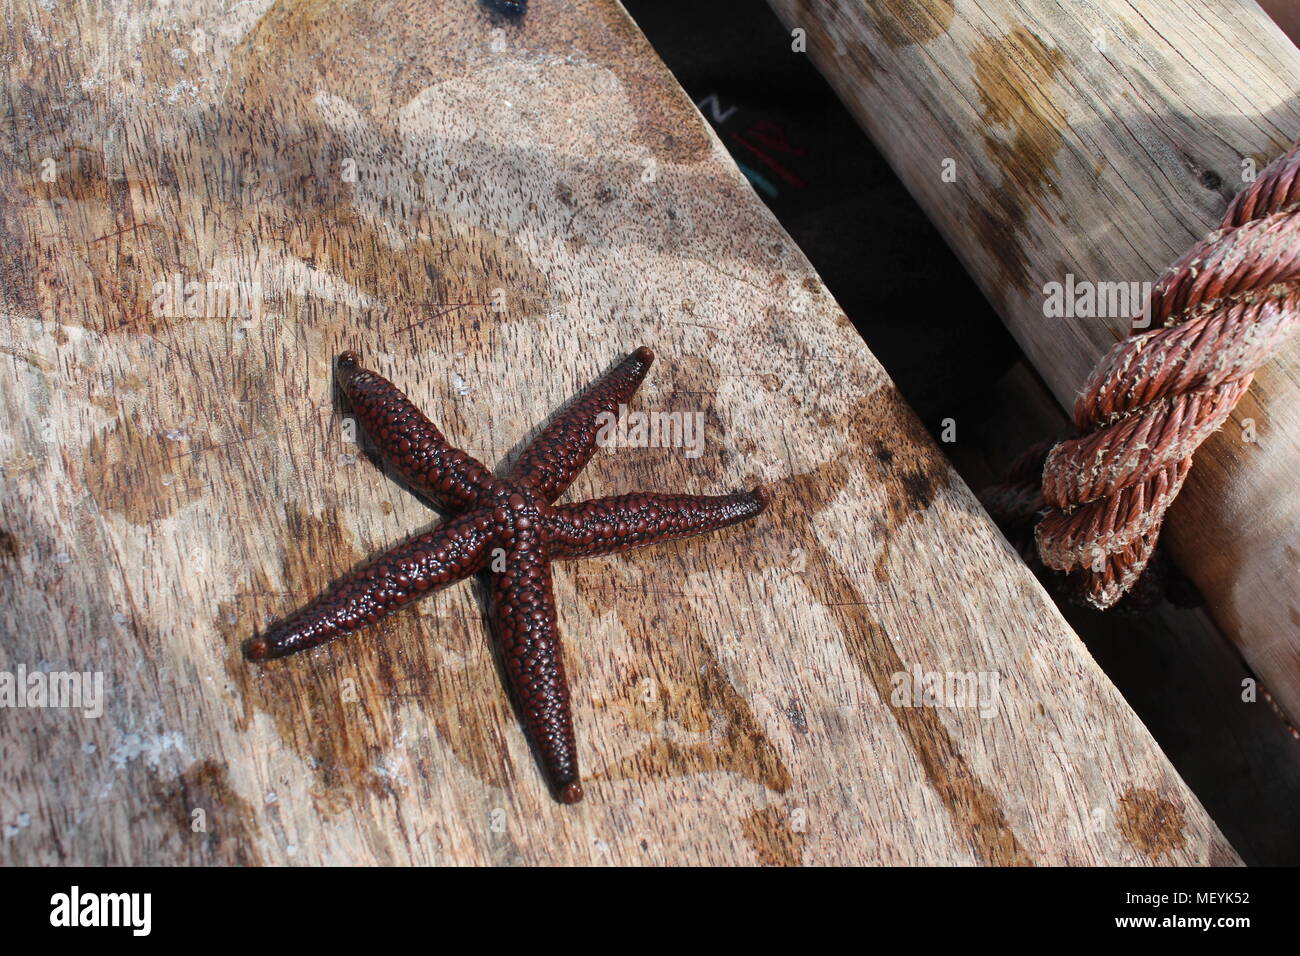 Brown star fish / sea star fresh out of the water on wooden boat with rope on the side. Zanzibar, Tanzania Stock Photo